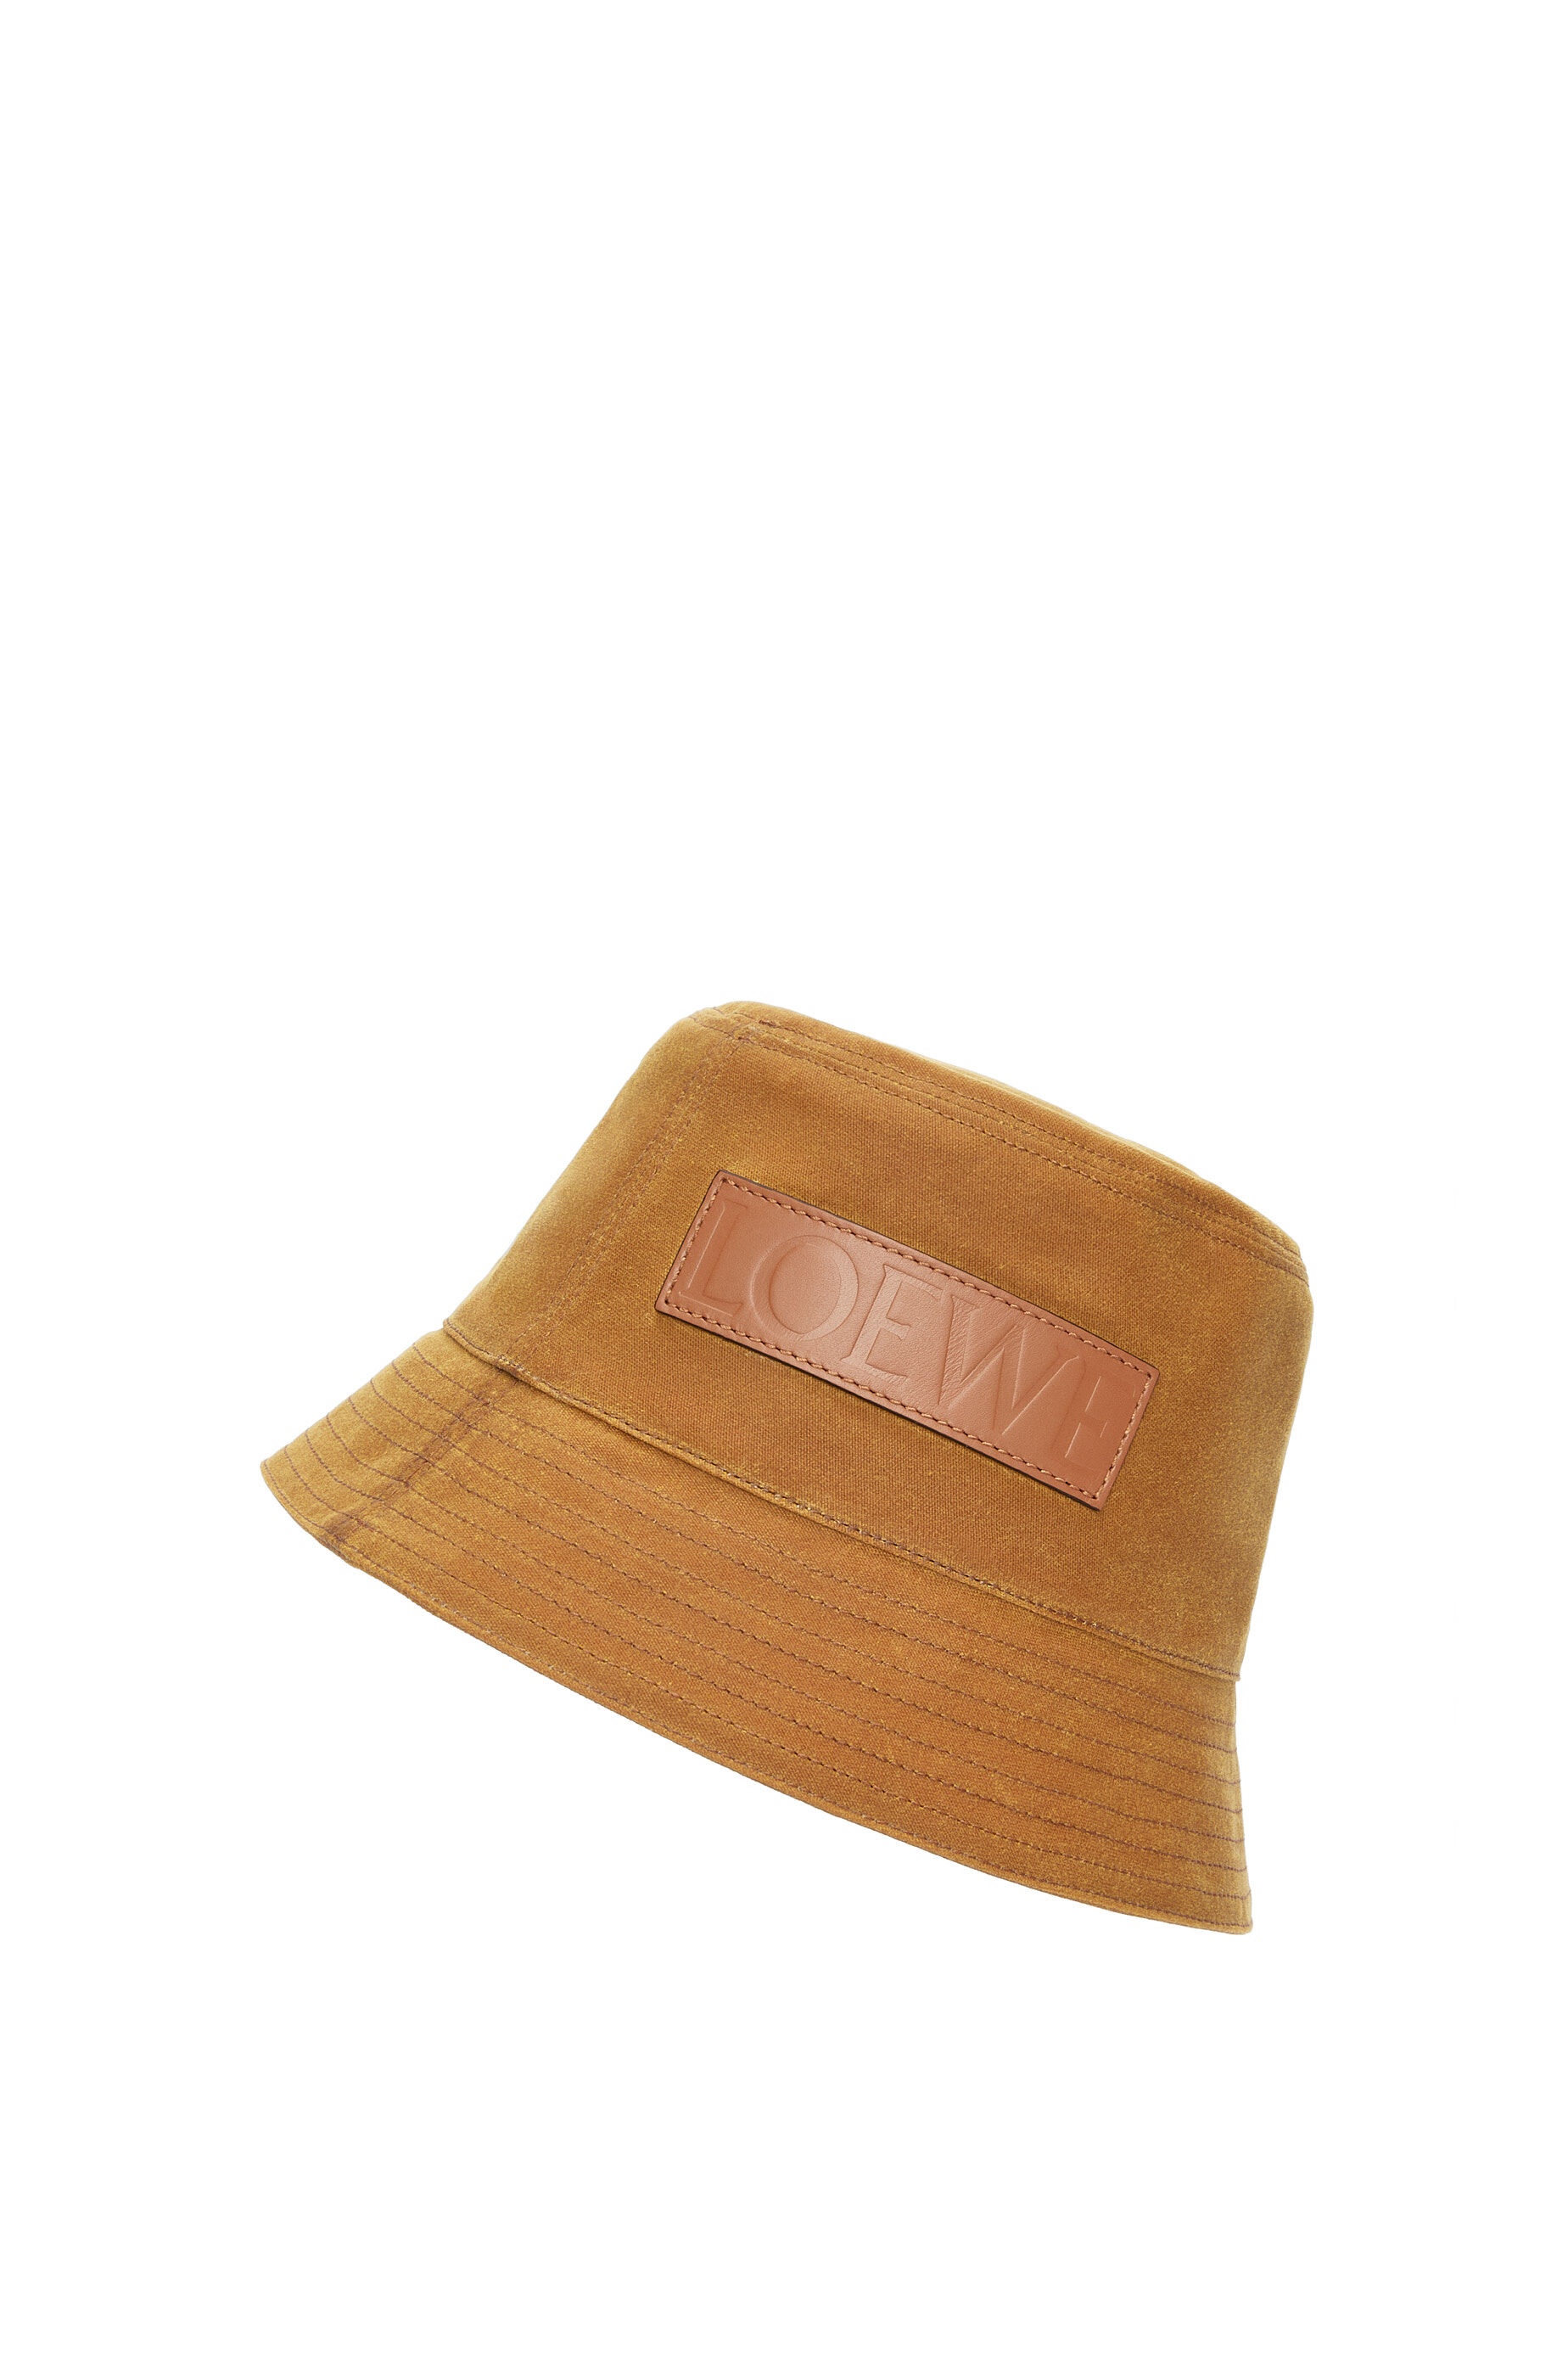 Bucket hat in waxed canvas and calfskin - 3